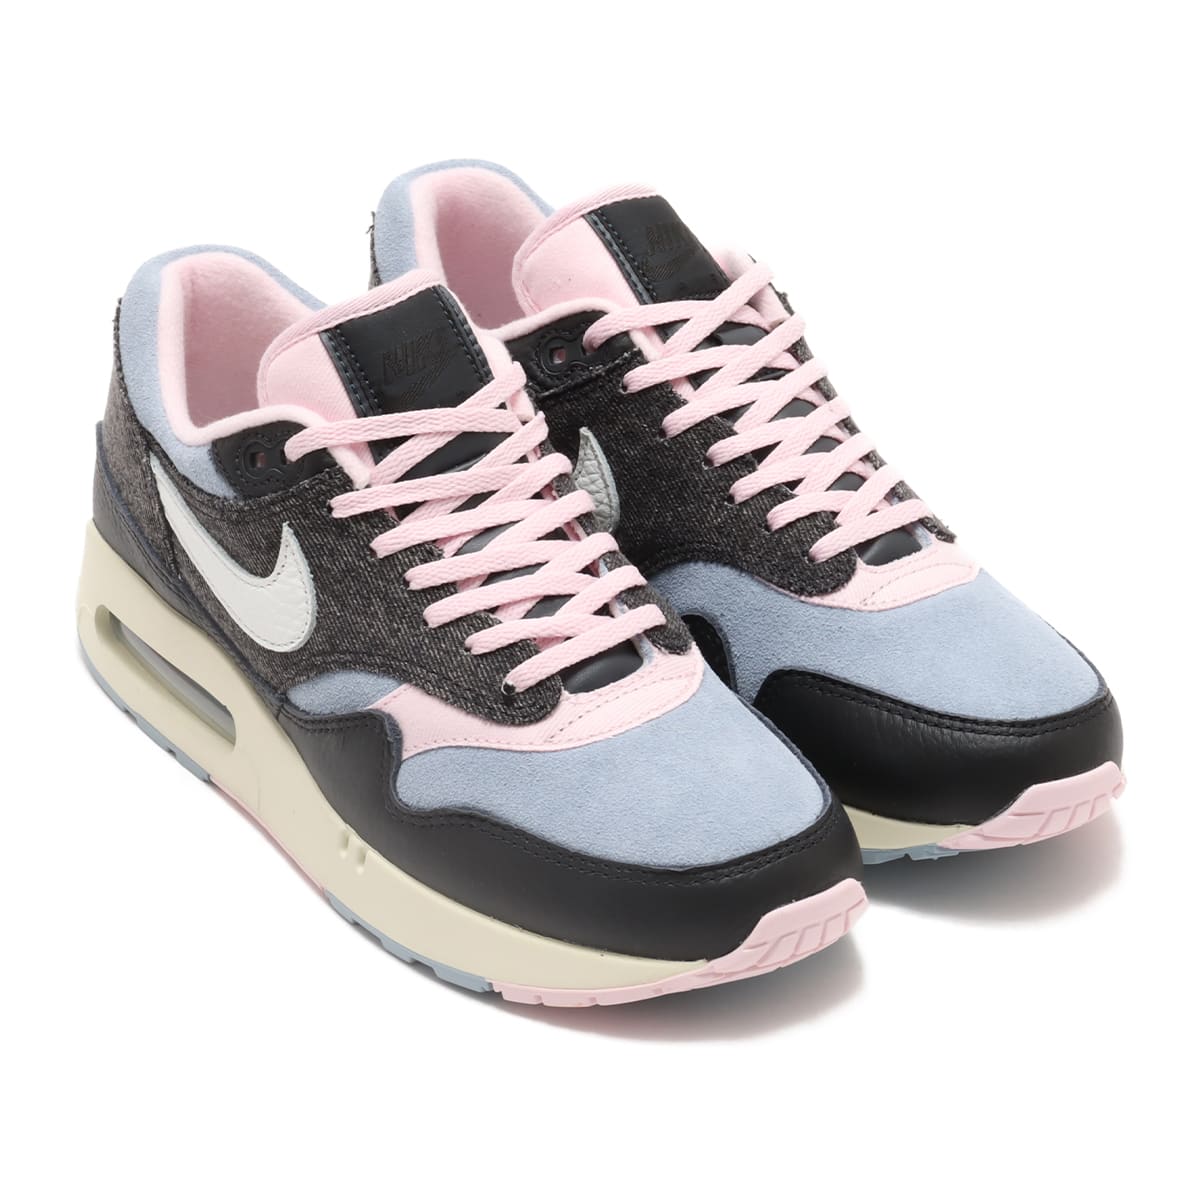 NIKE AIR MAX 1 '86 PRM BLACK/SUMMIT WHITE-ANTHRACITE-PINK FOAM 23HO-S_photo_large